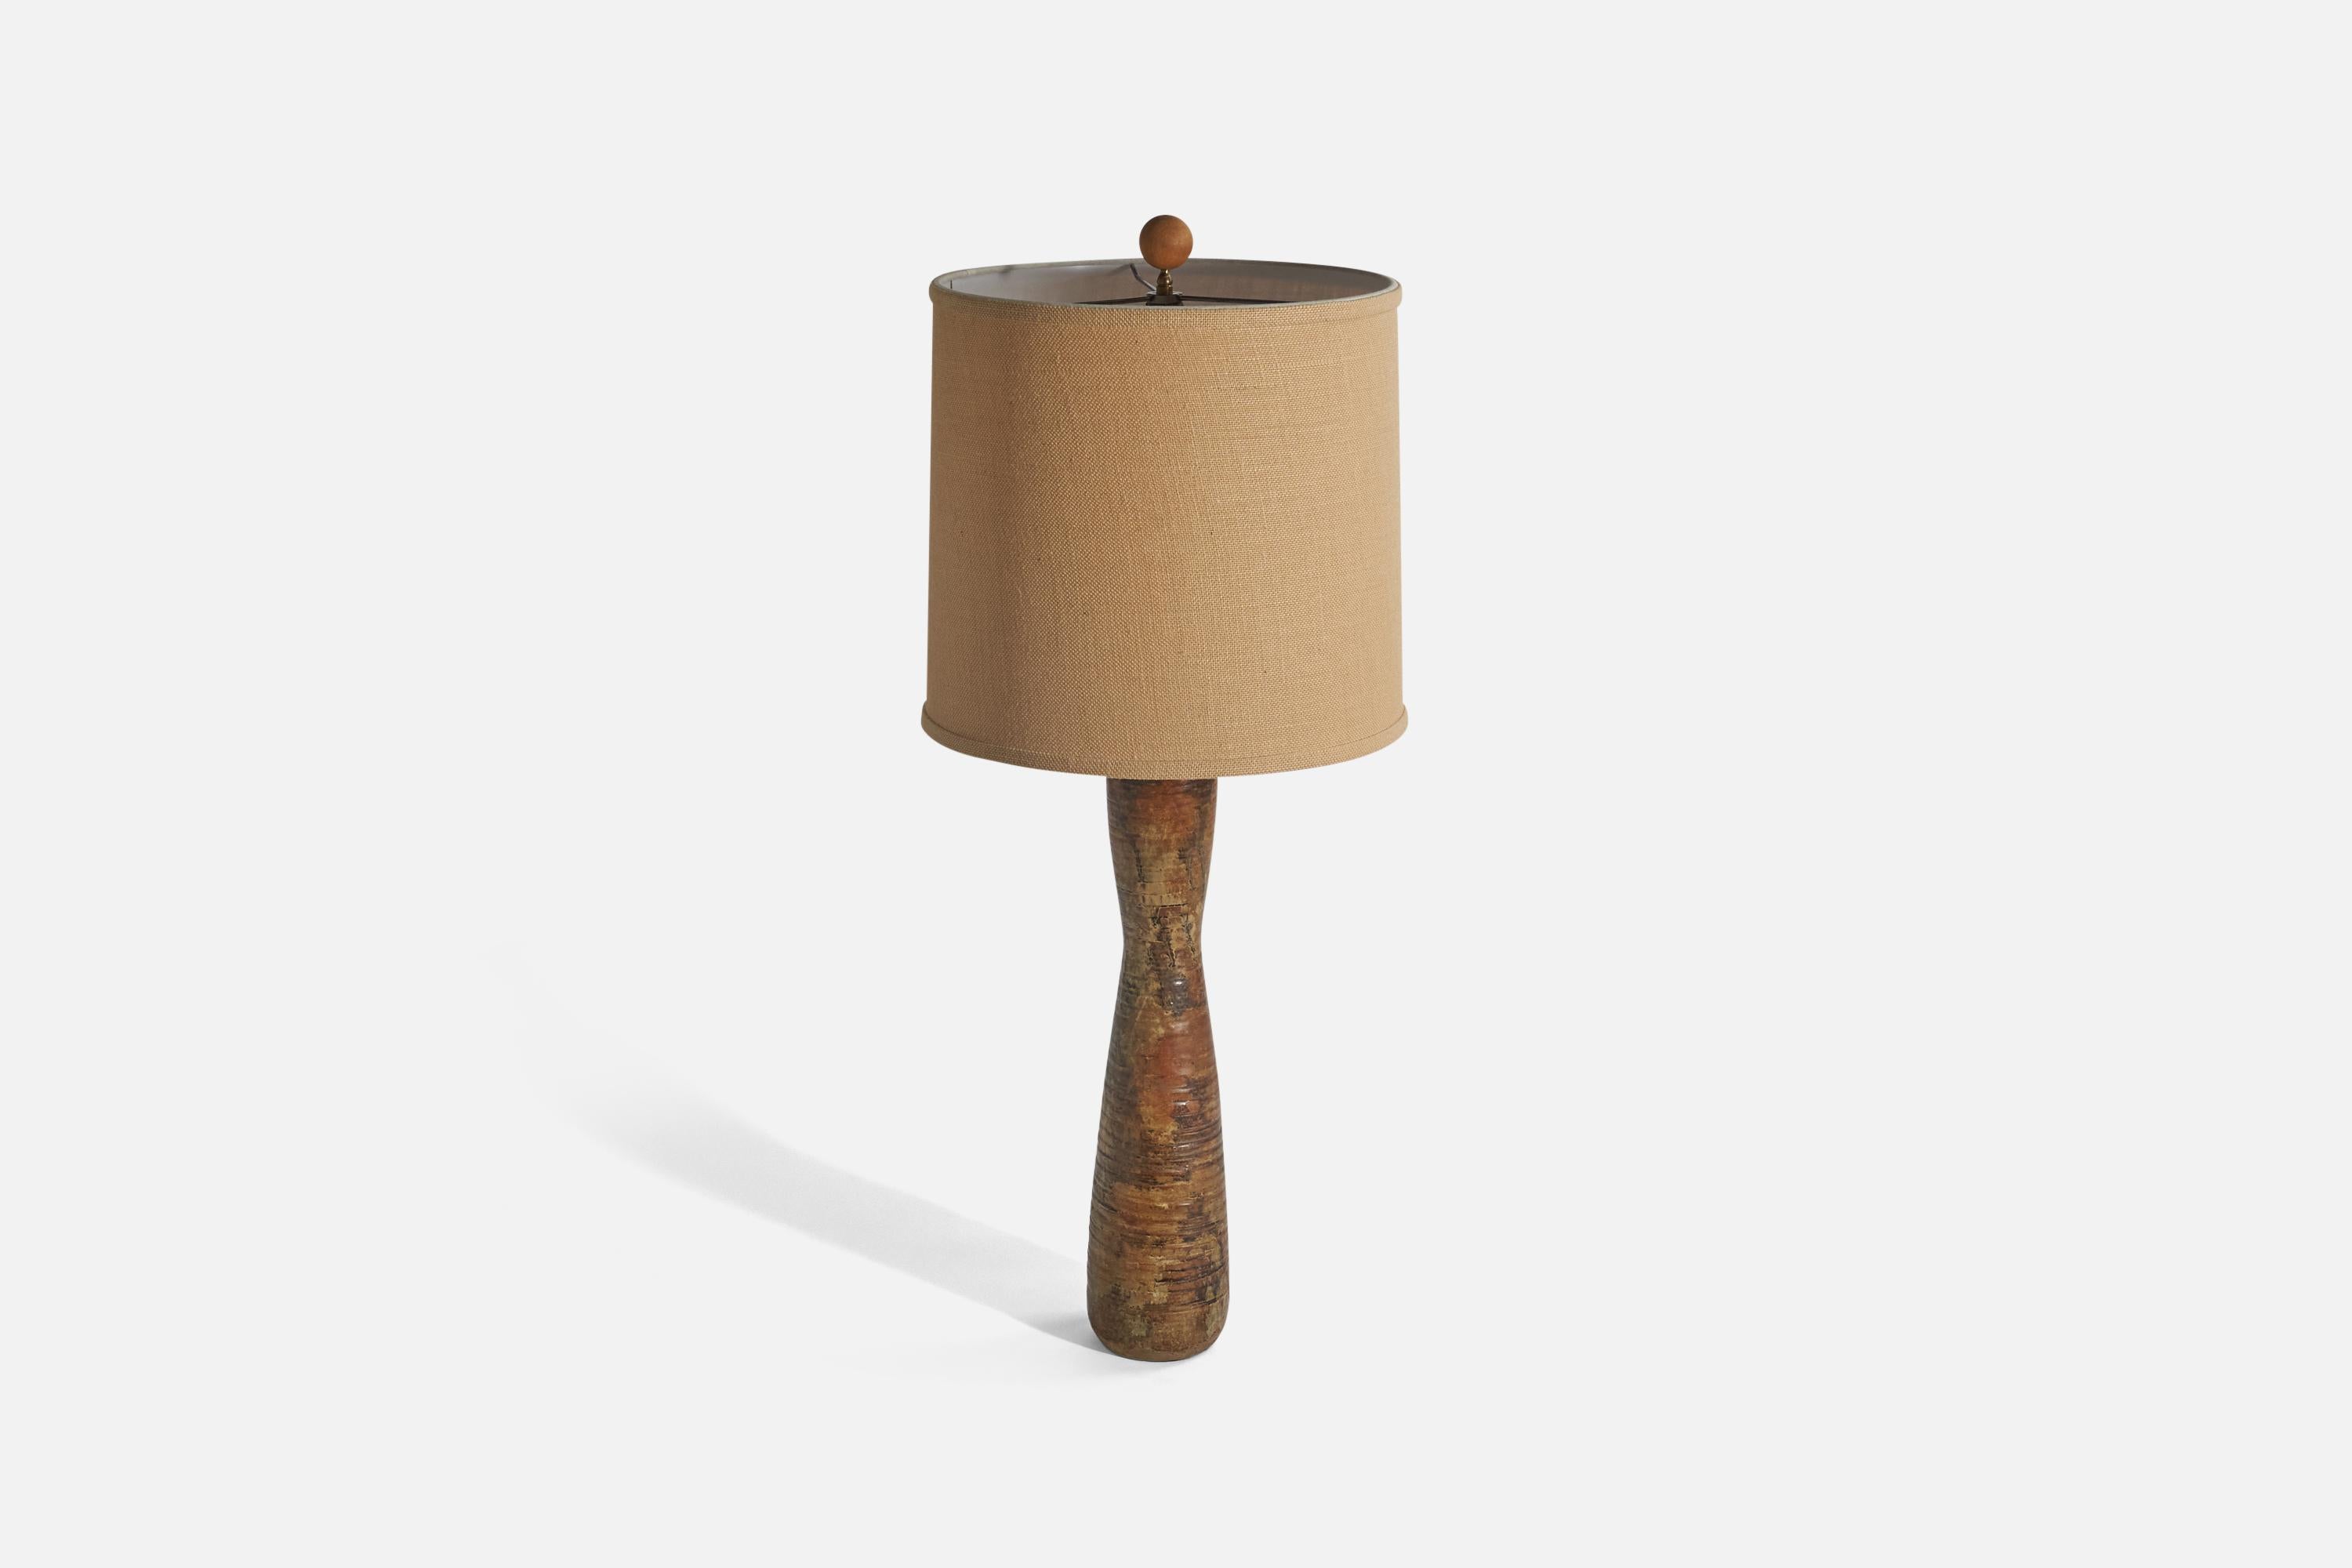 A brown-glazed ceramic, wood and light brown fabric table lamp designed and produced in the United States, c. 1950s. 

Sold with Lampshade(s). 
Stated dimensions refer to the Lamp with the Shade(s). 

Socket takes standard E-26 medium base